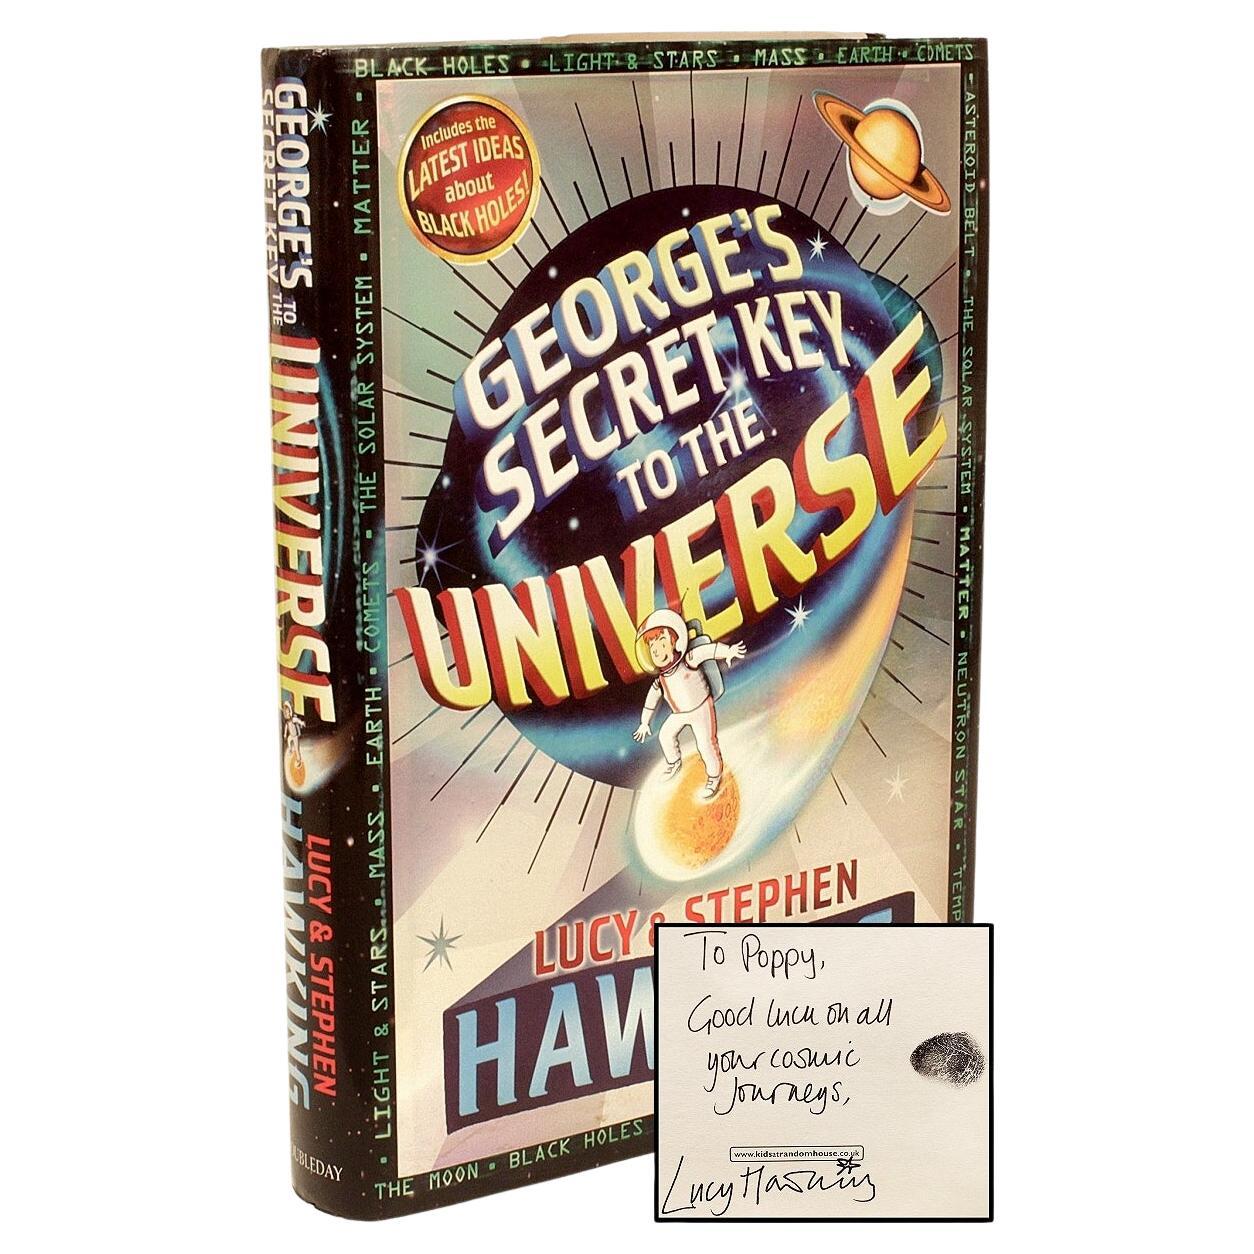 Lucy & Stephen Hawking. George's Secret Key to the Universe, 1st Ed, Signed For Sale